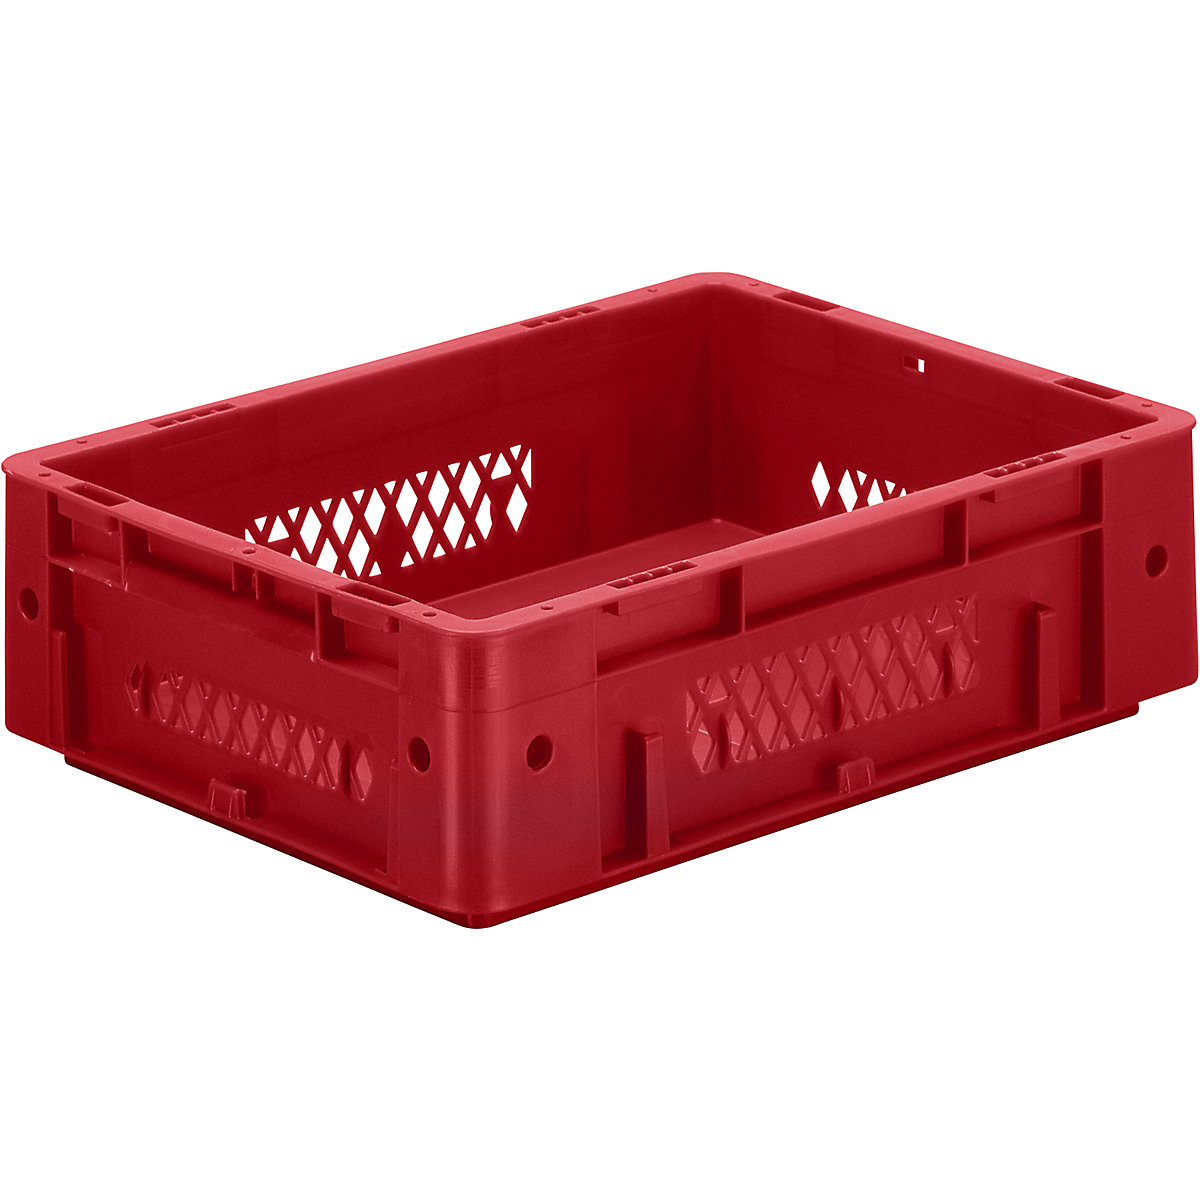 Heavy duty Euro container, polypropylene, capacity 9.2 l, LxWxH 400 x 300 x 120 mm, perforated walls, solid base, red, pack of 4-3